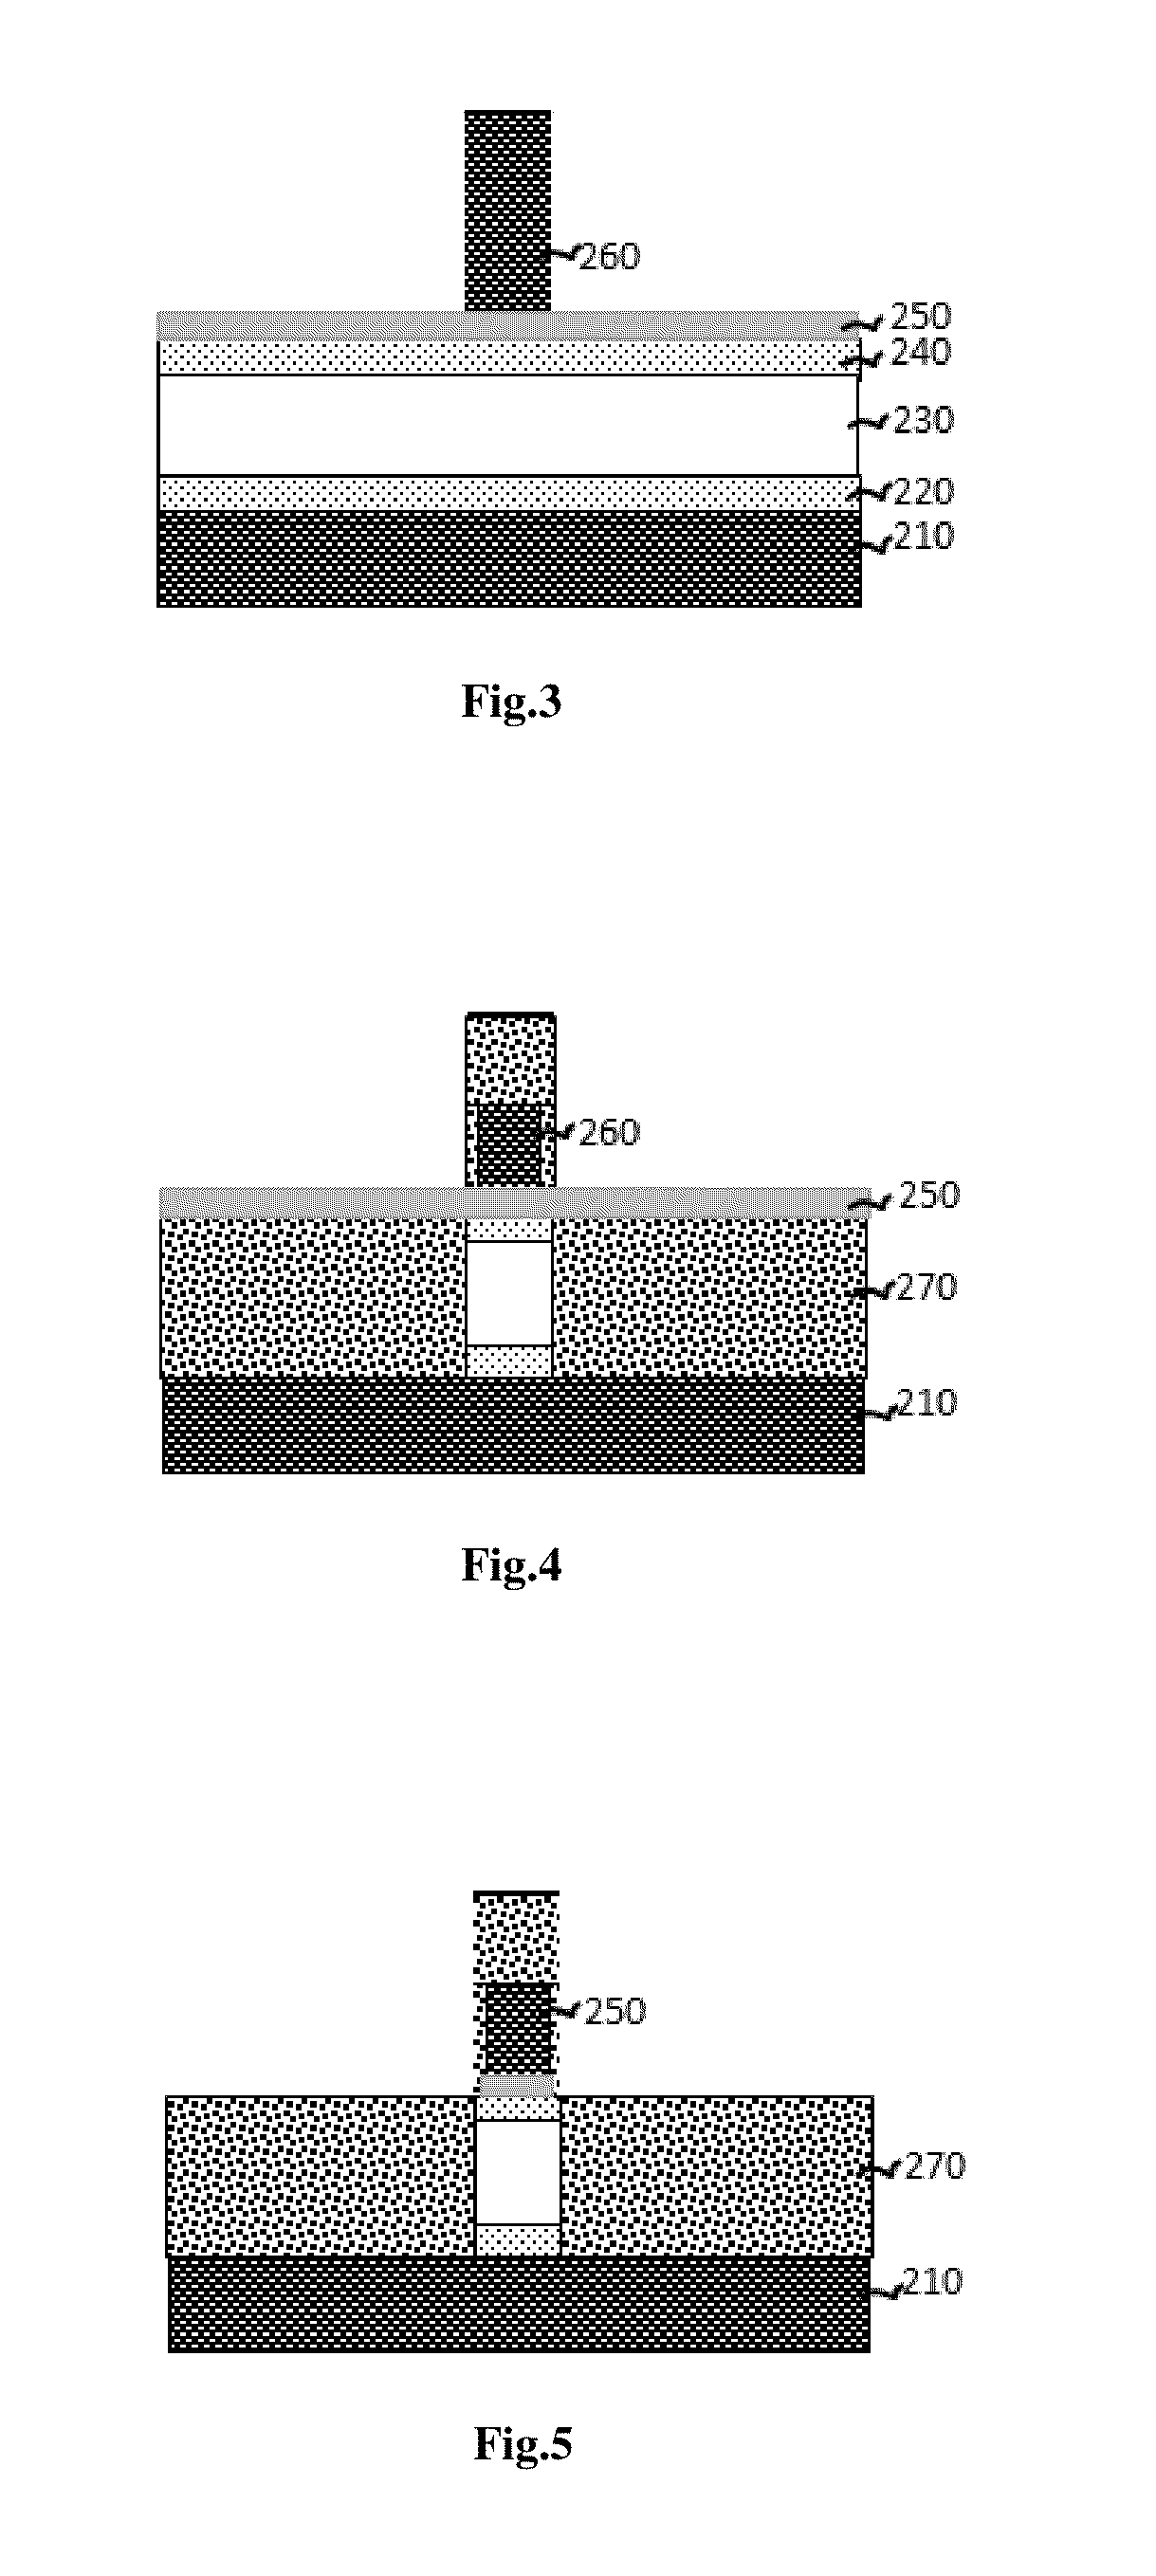 Method to make integrated device using oxygen ion implantation